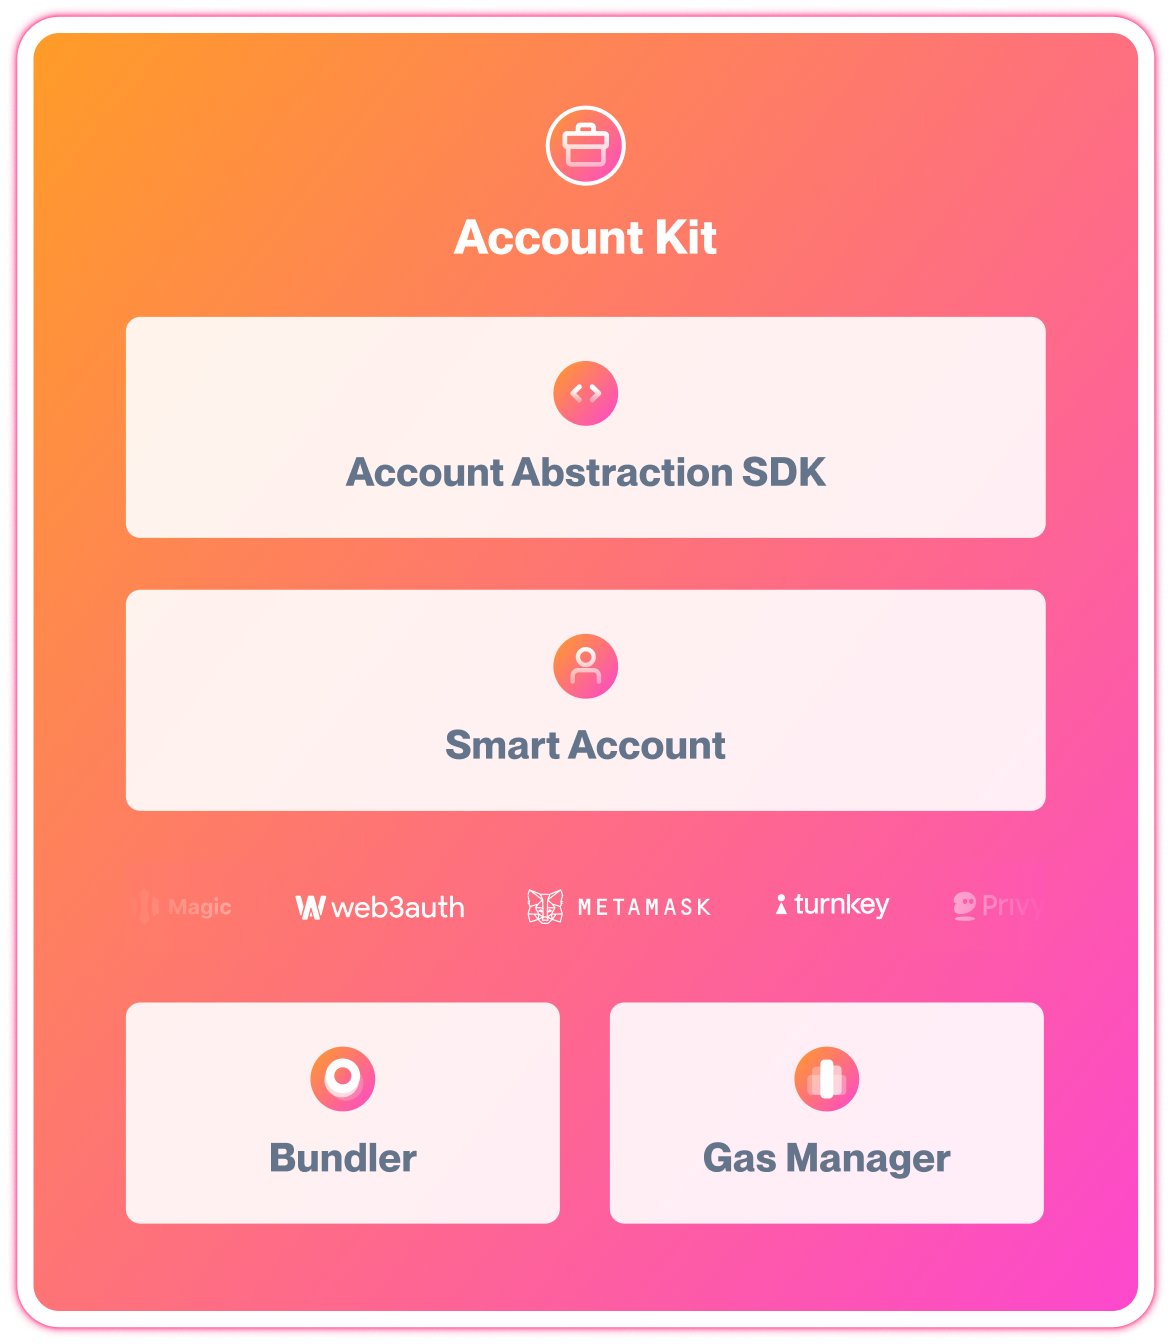 Account Kit is the complete toolkit